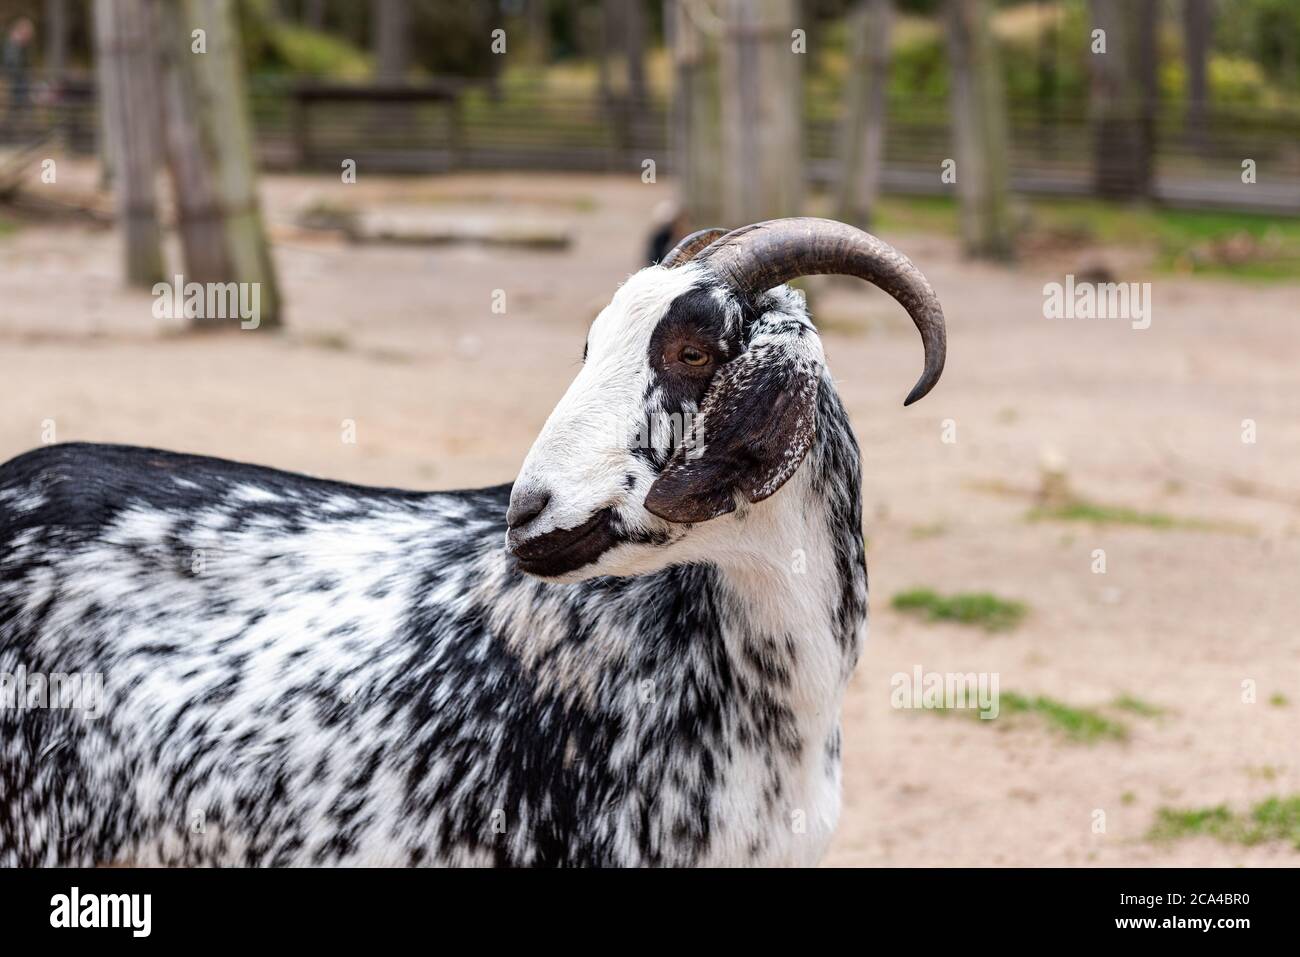 The domestic goat or simply goat (Capra aegagrus hircus) is a subspecies of C. aegagrus domesticated from the wild goat of Southwest Asia and Eastern Stock Photo